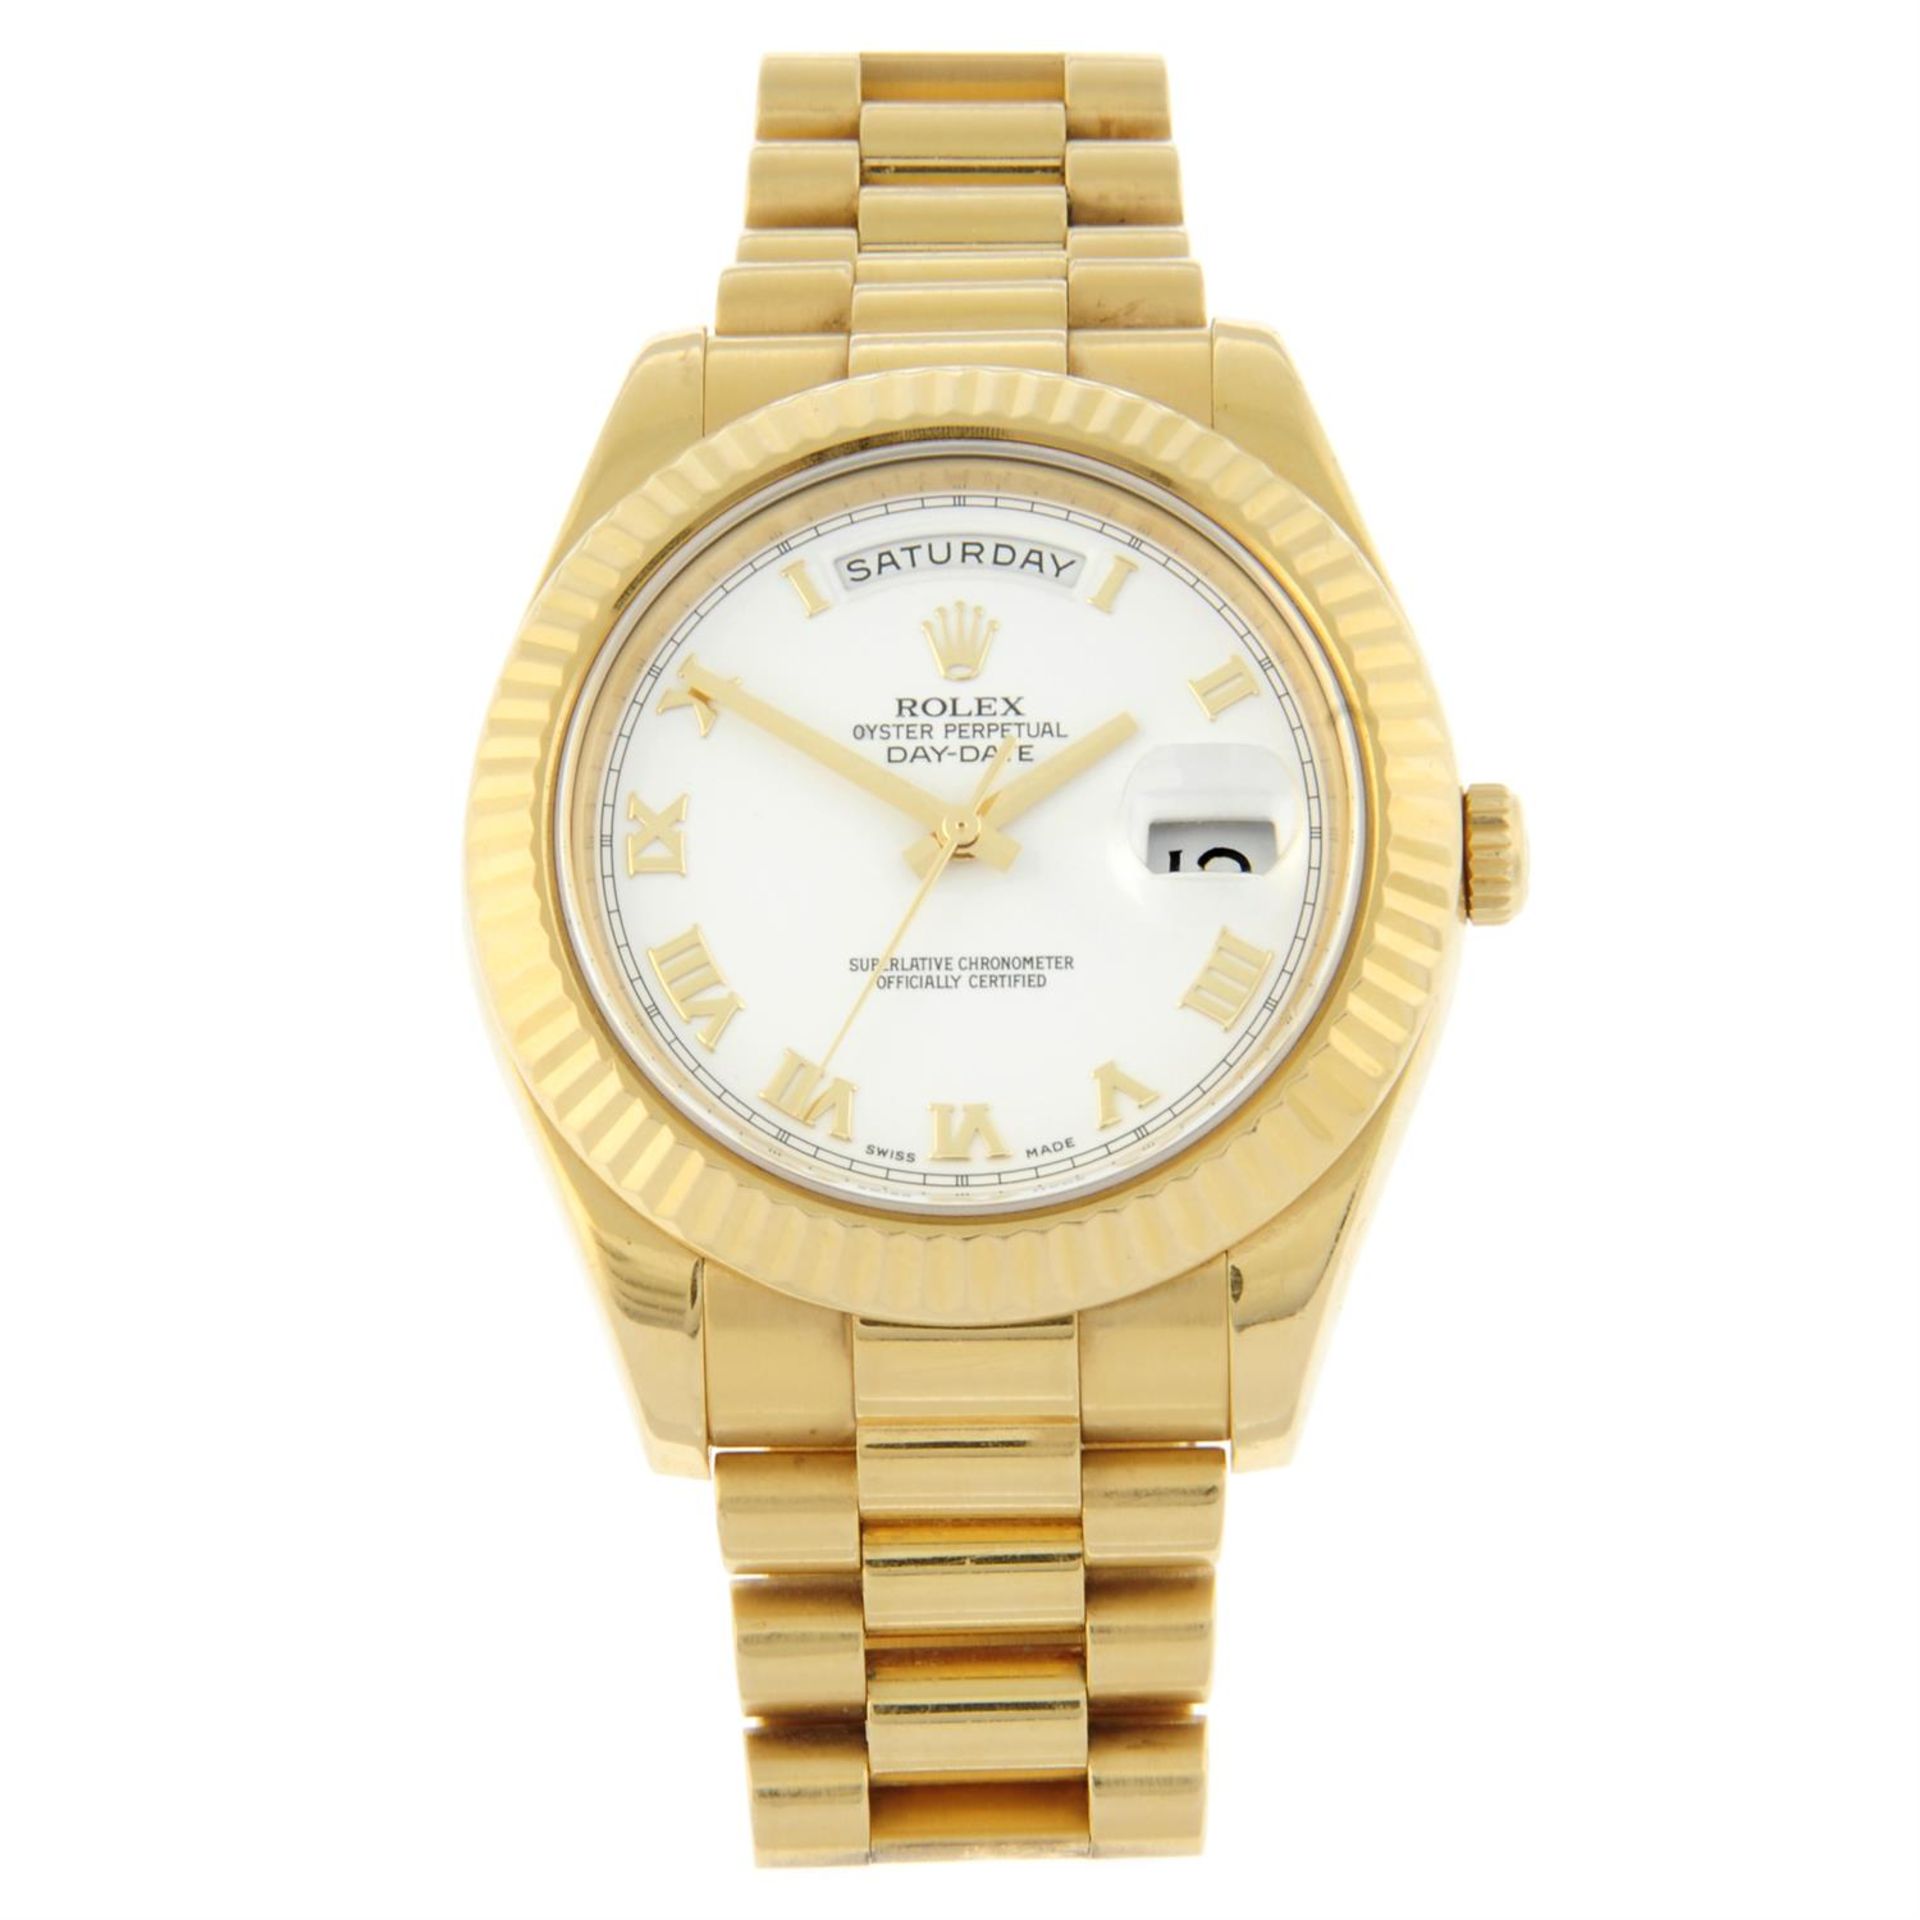 Rolex - an Oyster Perpetual Day-Date II watch, 41mm.